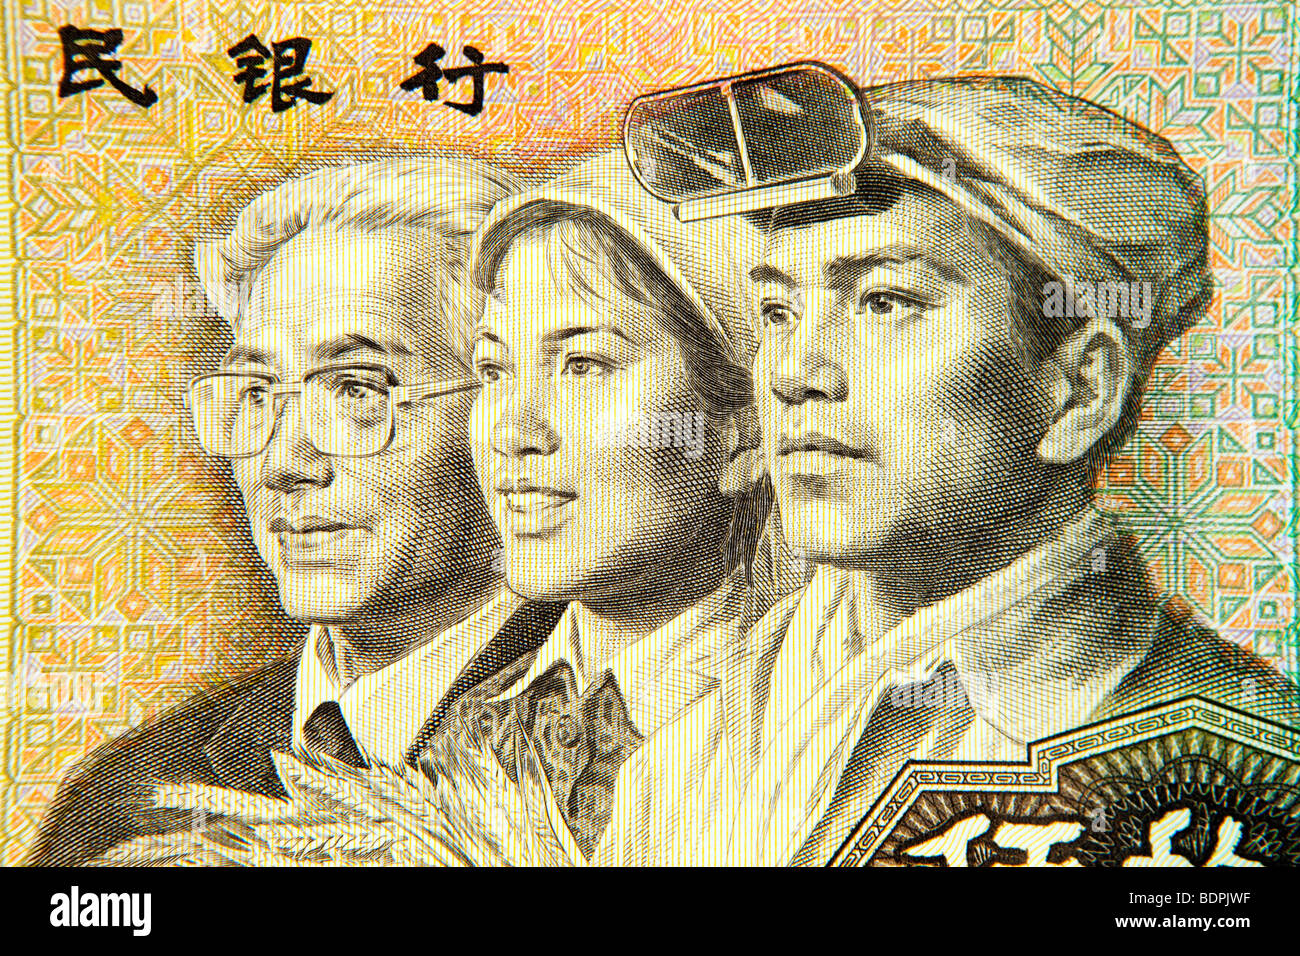 Money currency detail of Chinese 50 Yuan banknote Stock Photo